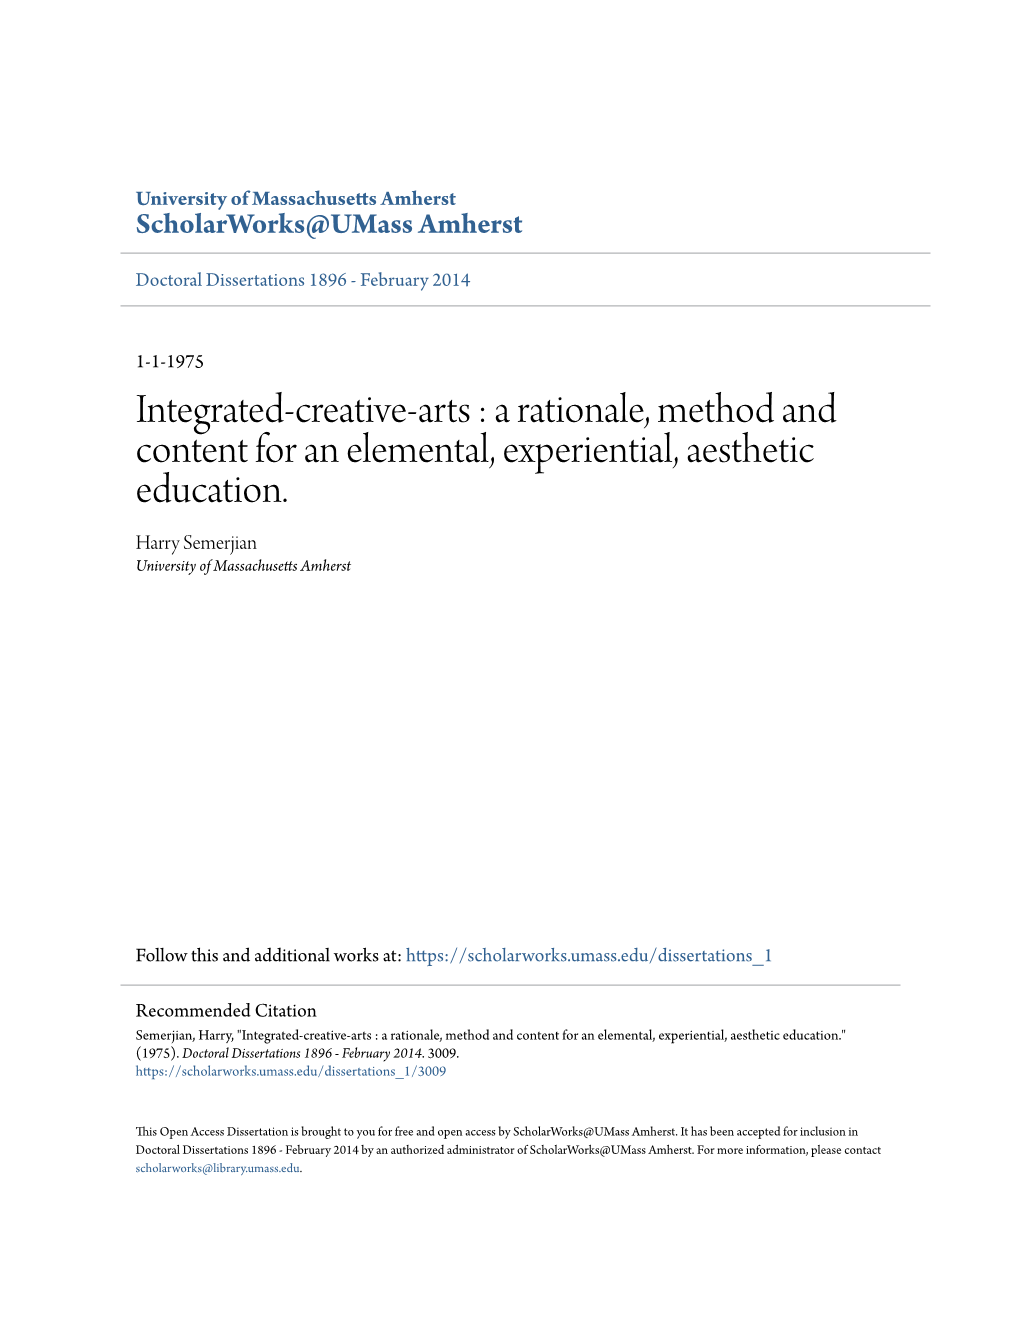 Integrated-Creative-Arts : a Rationale, Method and Content for an Elemental, Experiential, Aesthetic Education